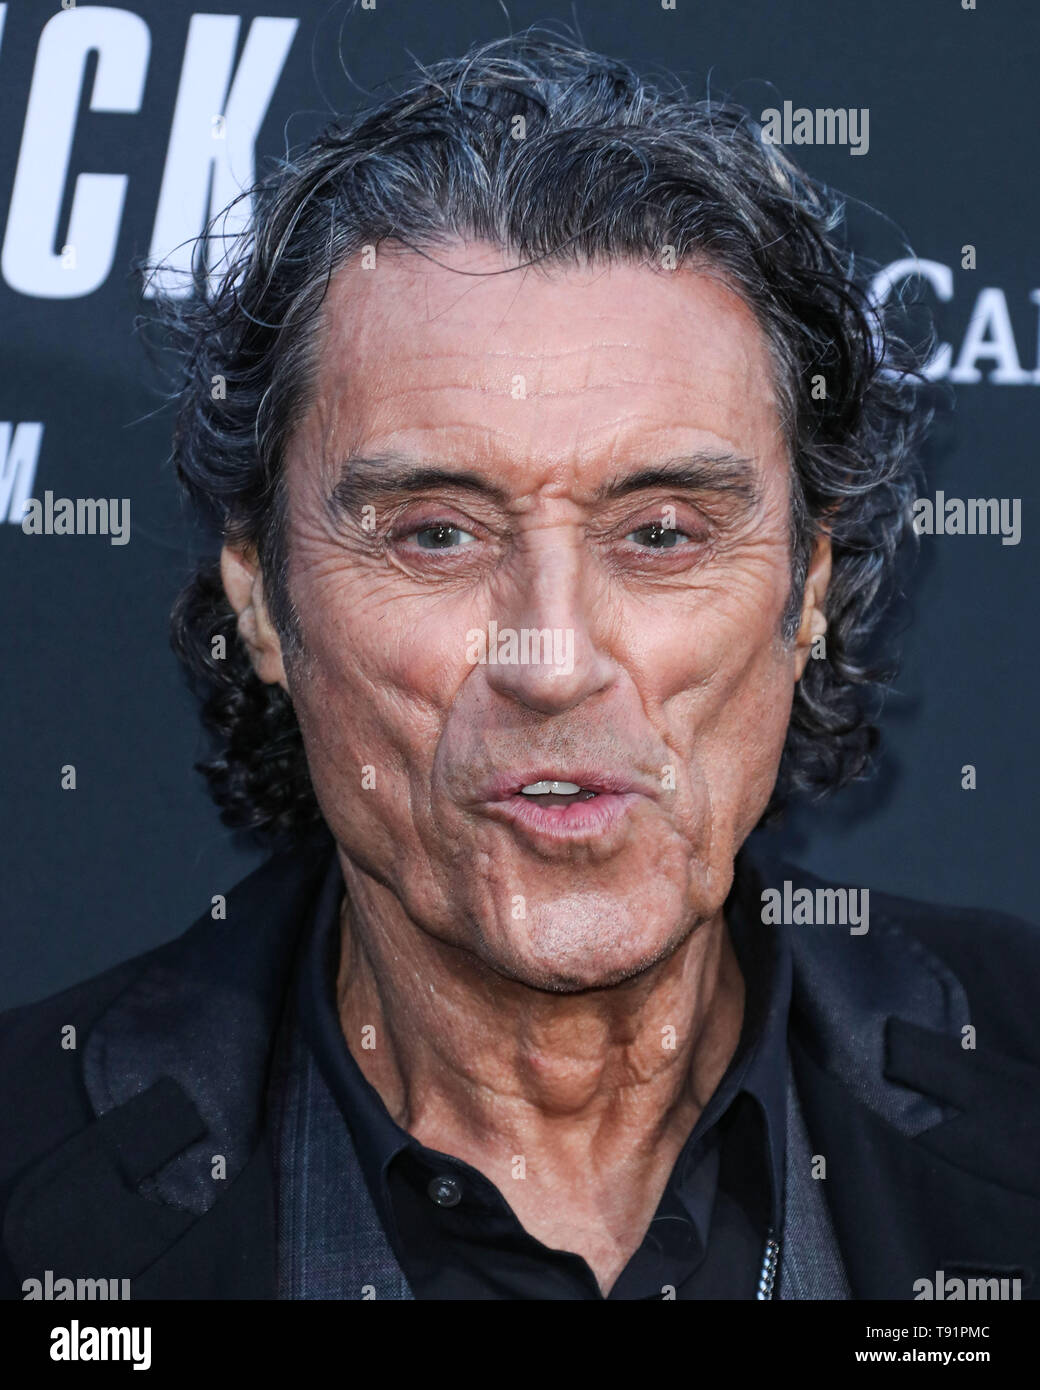 HOLLYWOOD, LOS ANGELES, CALIFORNIA, USA - MAY 15: Actor Ian McShane arrives at the Los Angeles Special Screening Of Lionsgate's 'John Wick: Chapter 3 - Parabellum' held at the TCL Chinese Theatre IMAX on May 15, 2019 in Los Angeles, California, United States. (Photo by Xavier Collin/Image Press Agency) Stock Photo